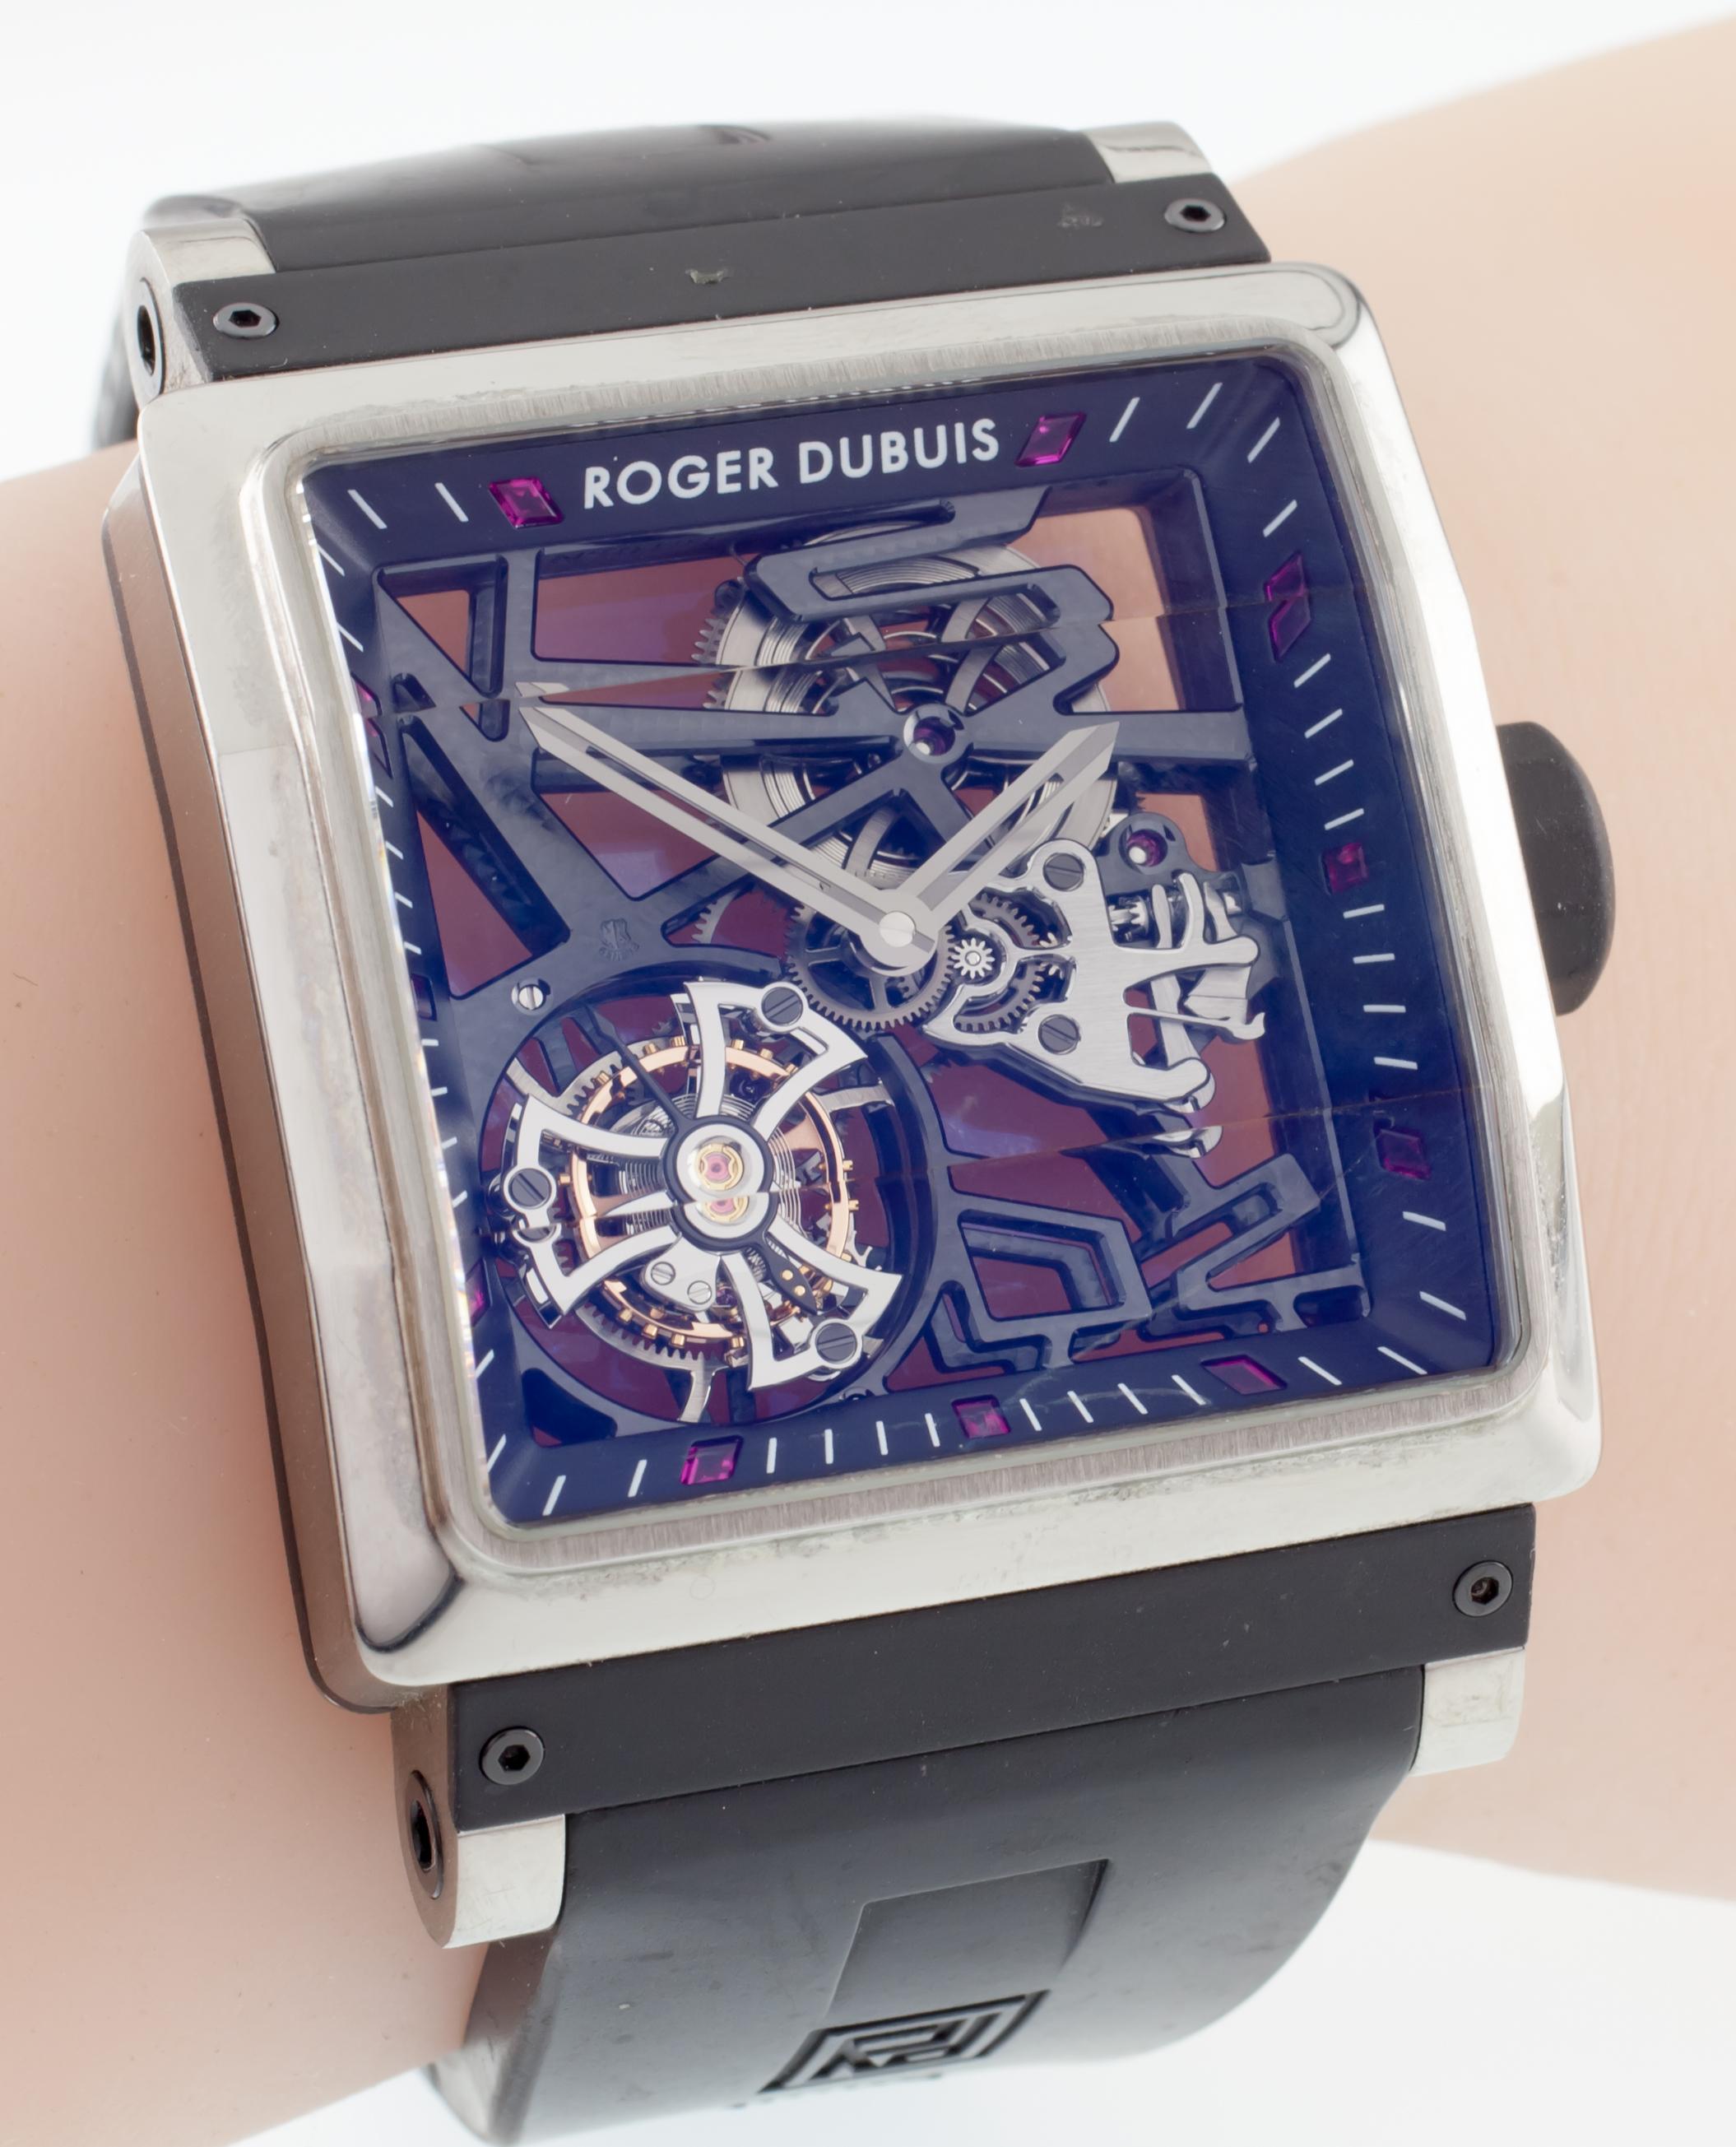 Model: King Square
Limited Edition #110 of 280
Titanium Case w/ Rubber Elements
40 mm Wide
Includes Tourbillon Movement
Beveled Crystal over Skeleton Dial
Ruby Accents on Inner Bezel
Black Rubber Strap w/ Original Robert Dubuis Clasp
Piece is in